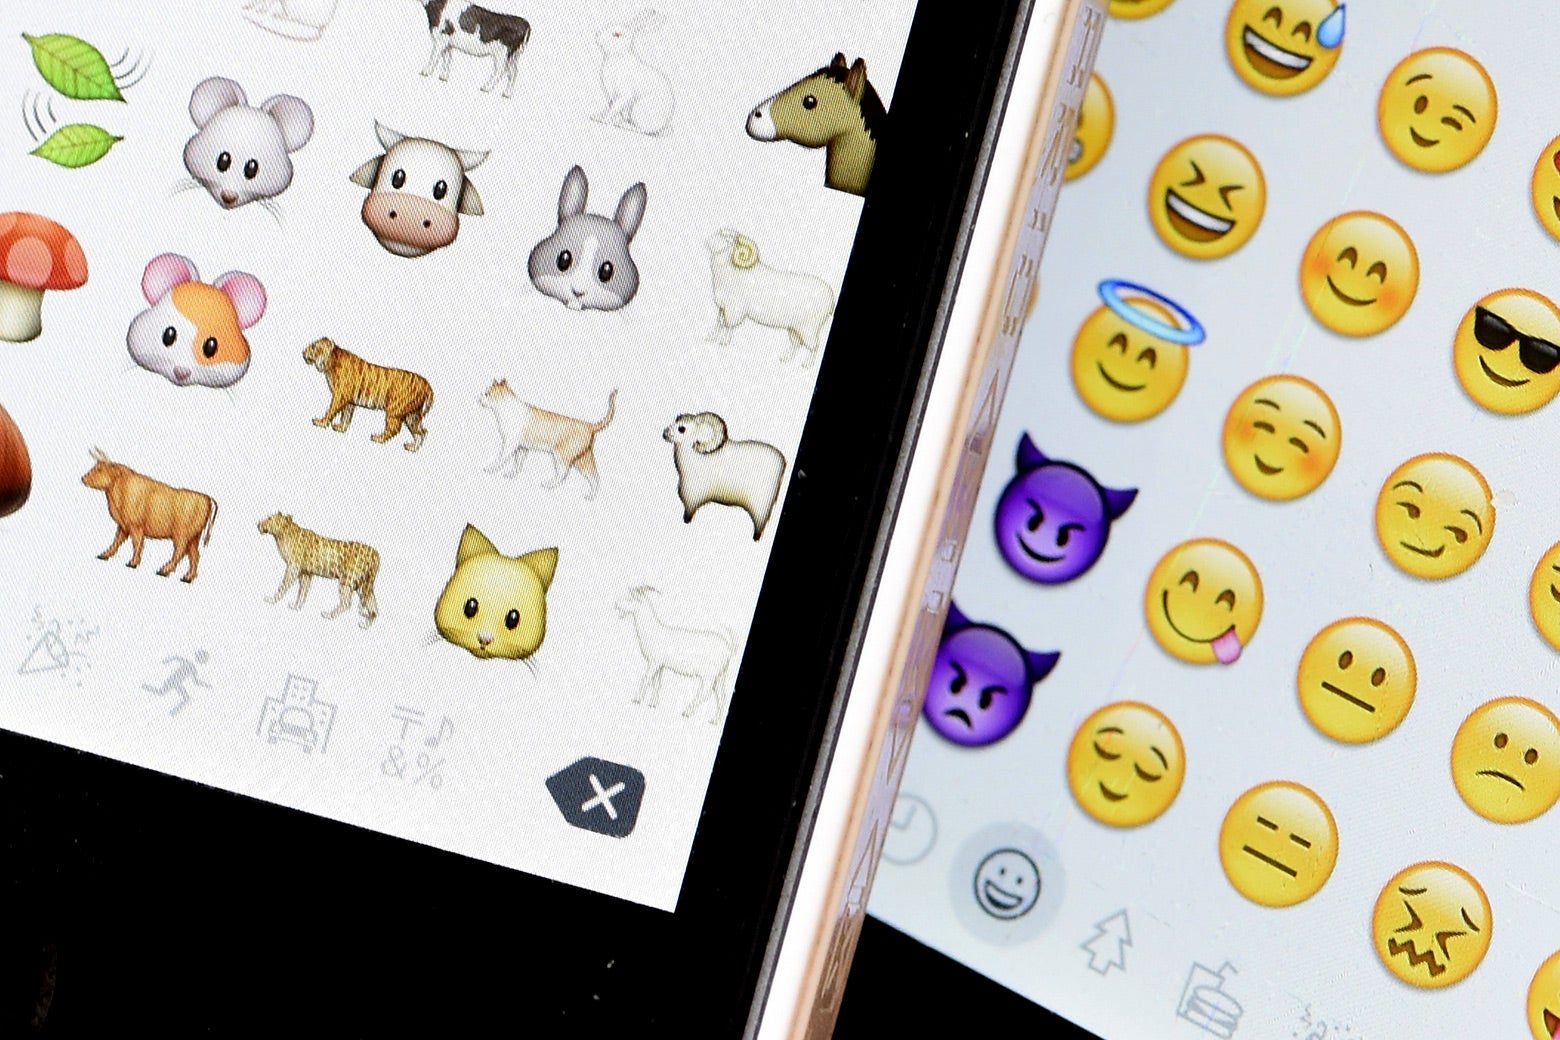 Because Internet excerpt: A linguistic taxonomy of emoji use.